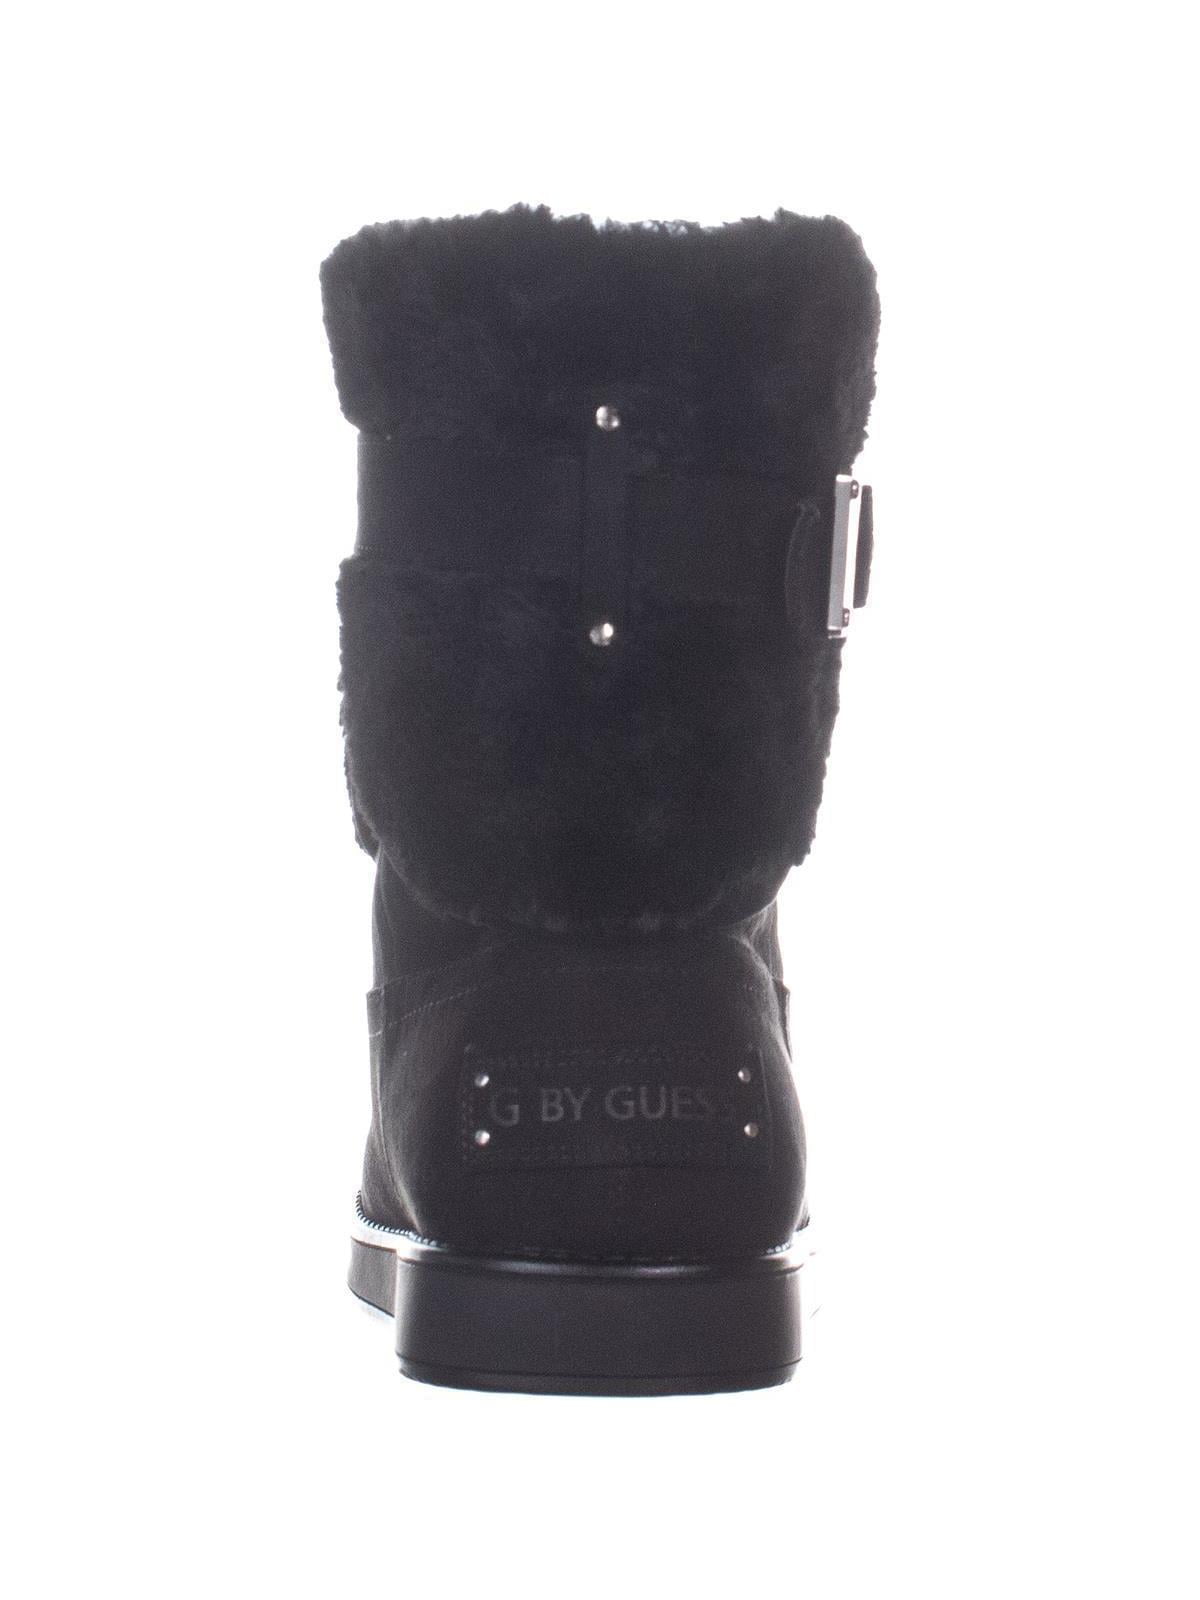 g by guess winter boots